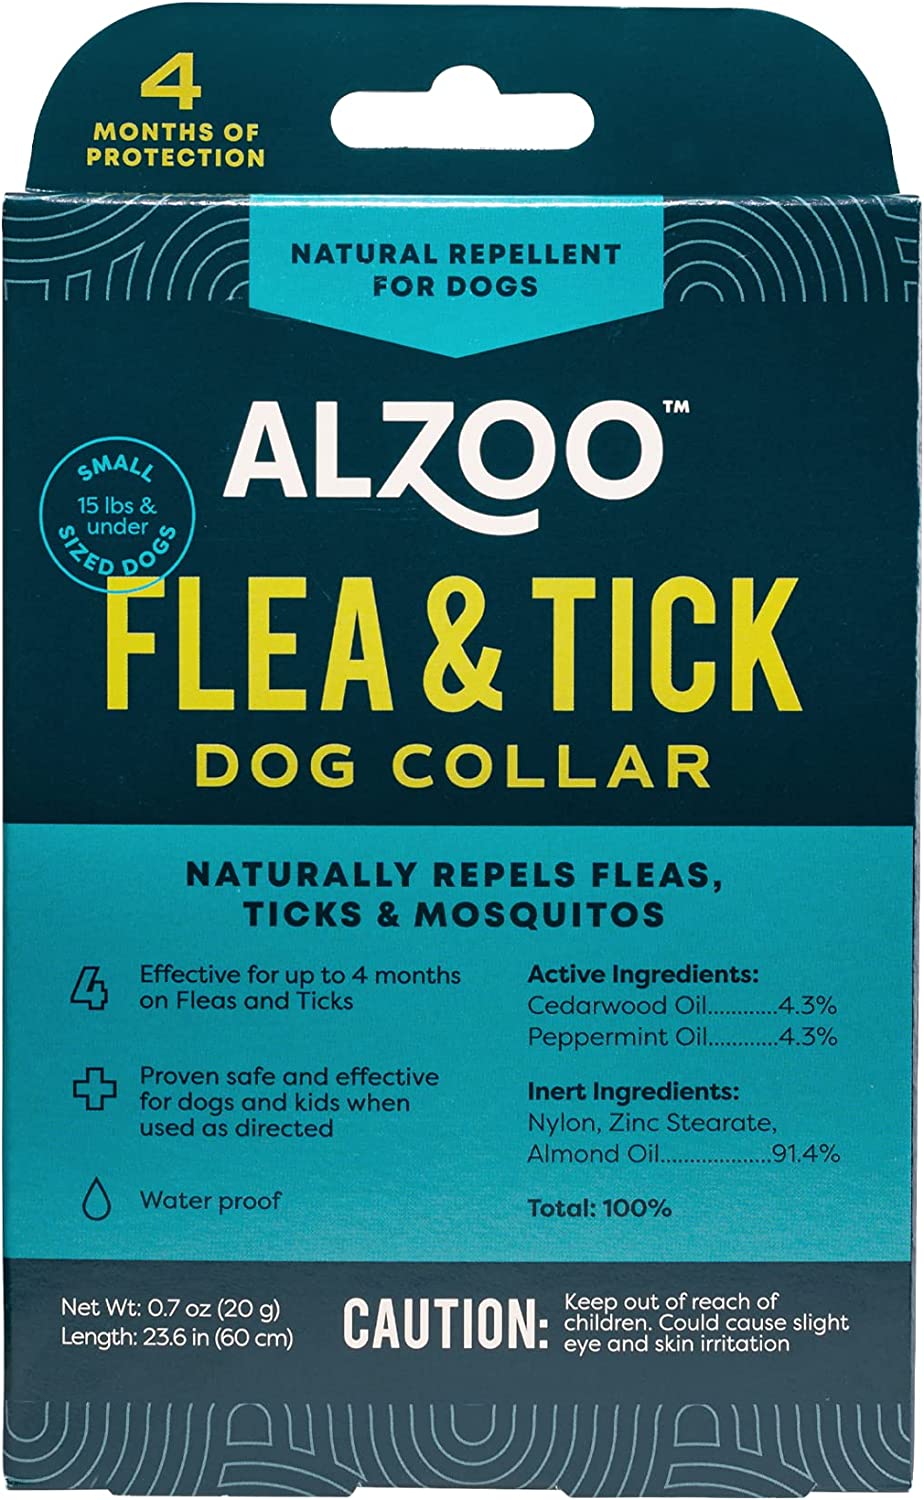 ALZOO Flea & Tick Dog Collar with Natural Diffusing Active Ingredients